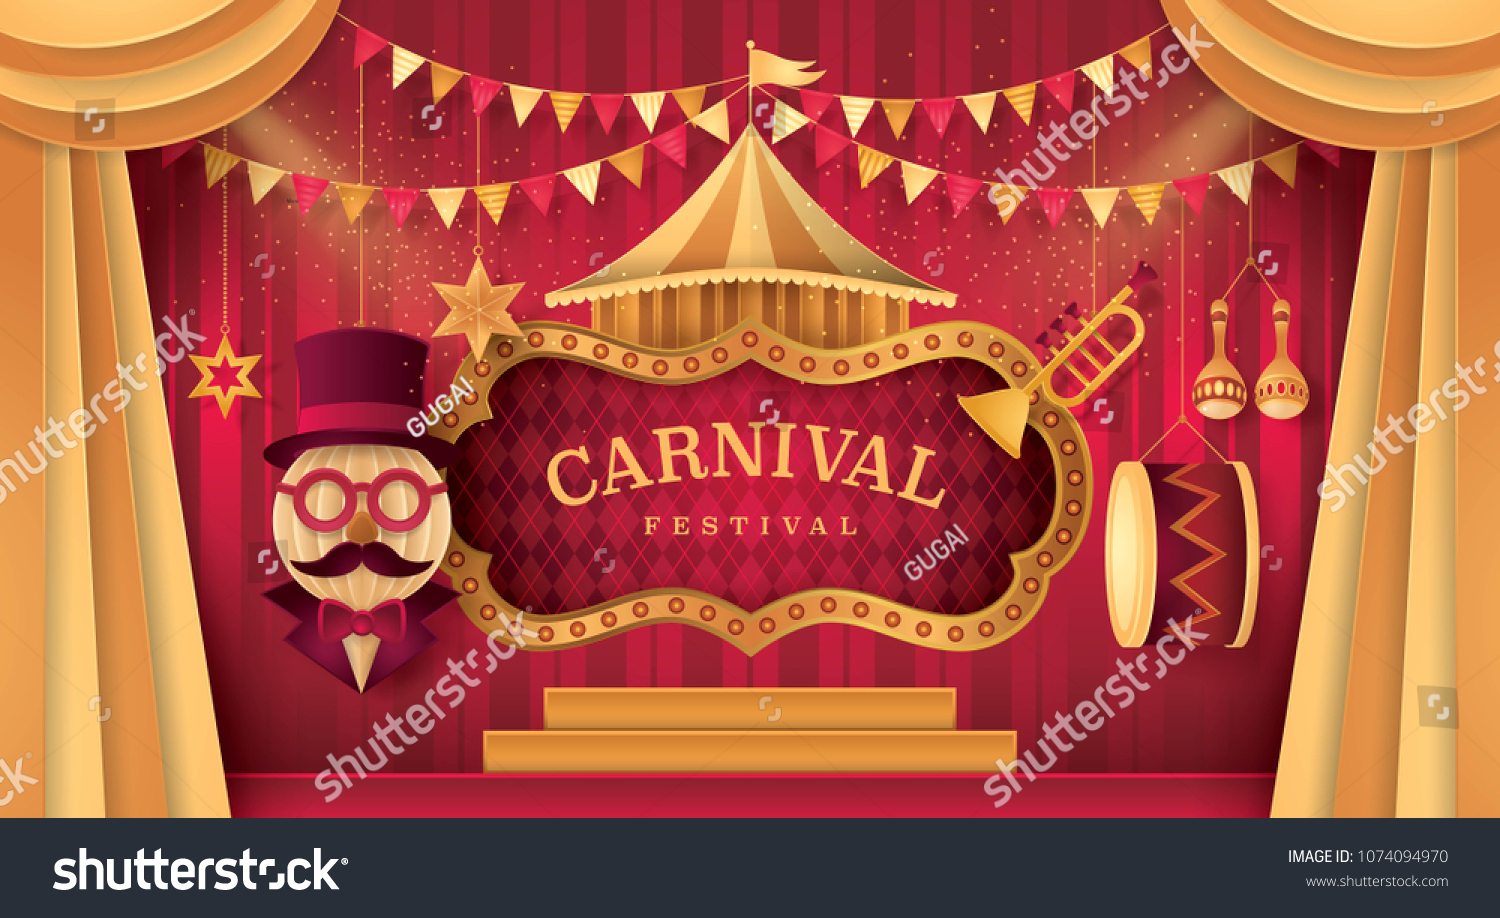 SVG of Gold Curtains stage with Circus Frame Border, Triangle bunting flags and Hanging Circus Barker with Hat,Glasses and Mustache, Carnival trumpet, Mexican maracas, Drum, Paper art vector and illustration svg